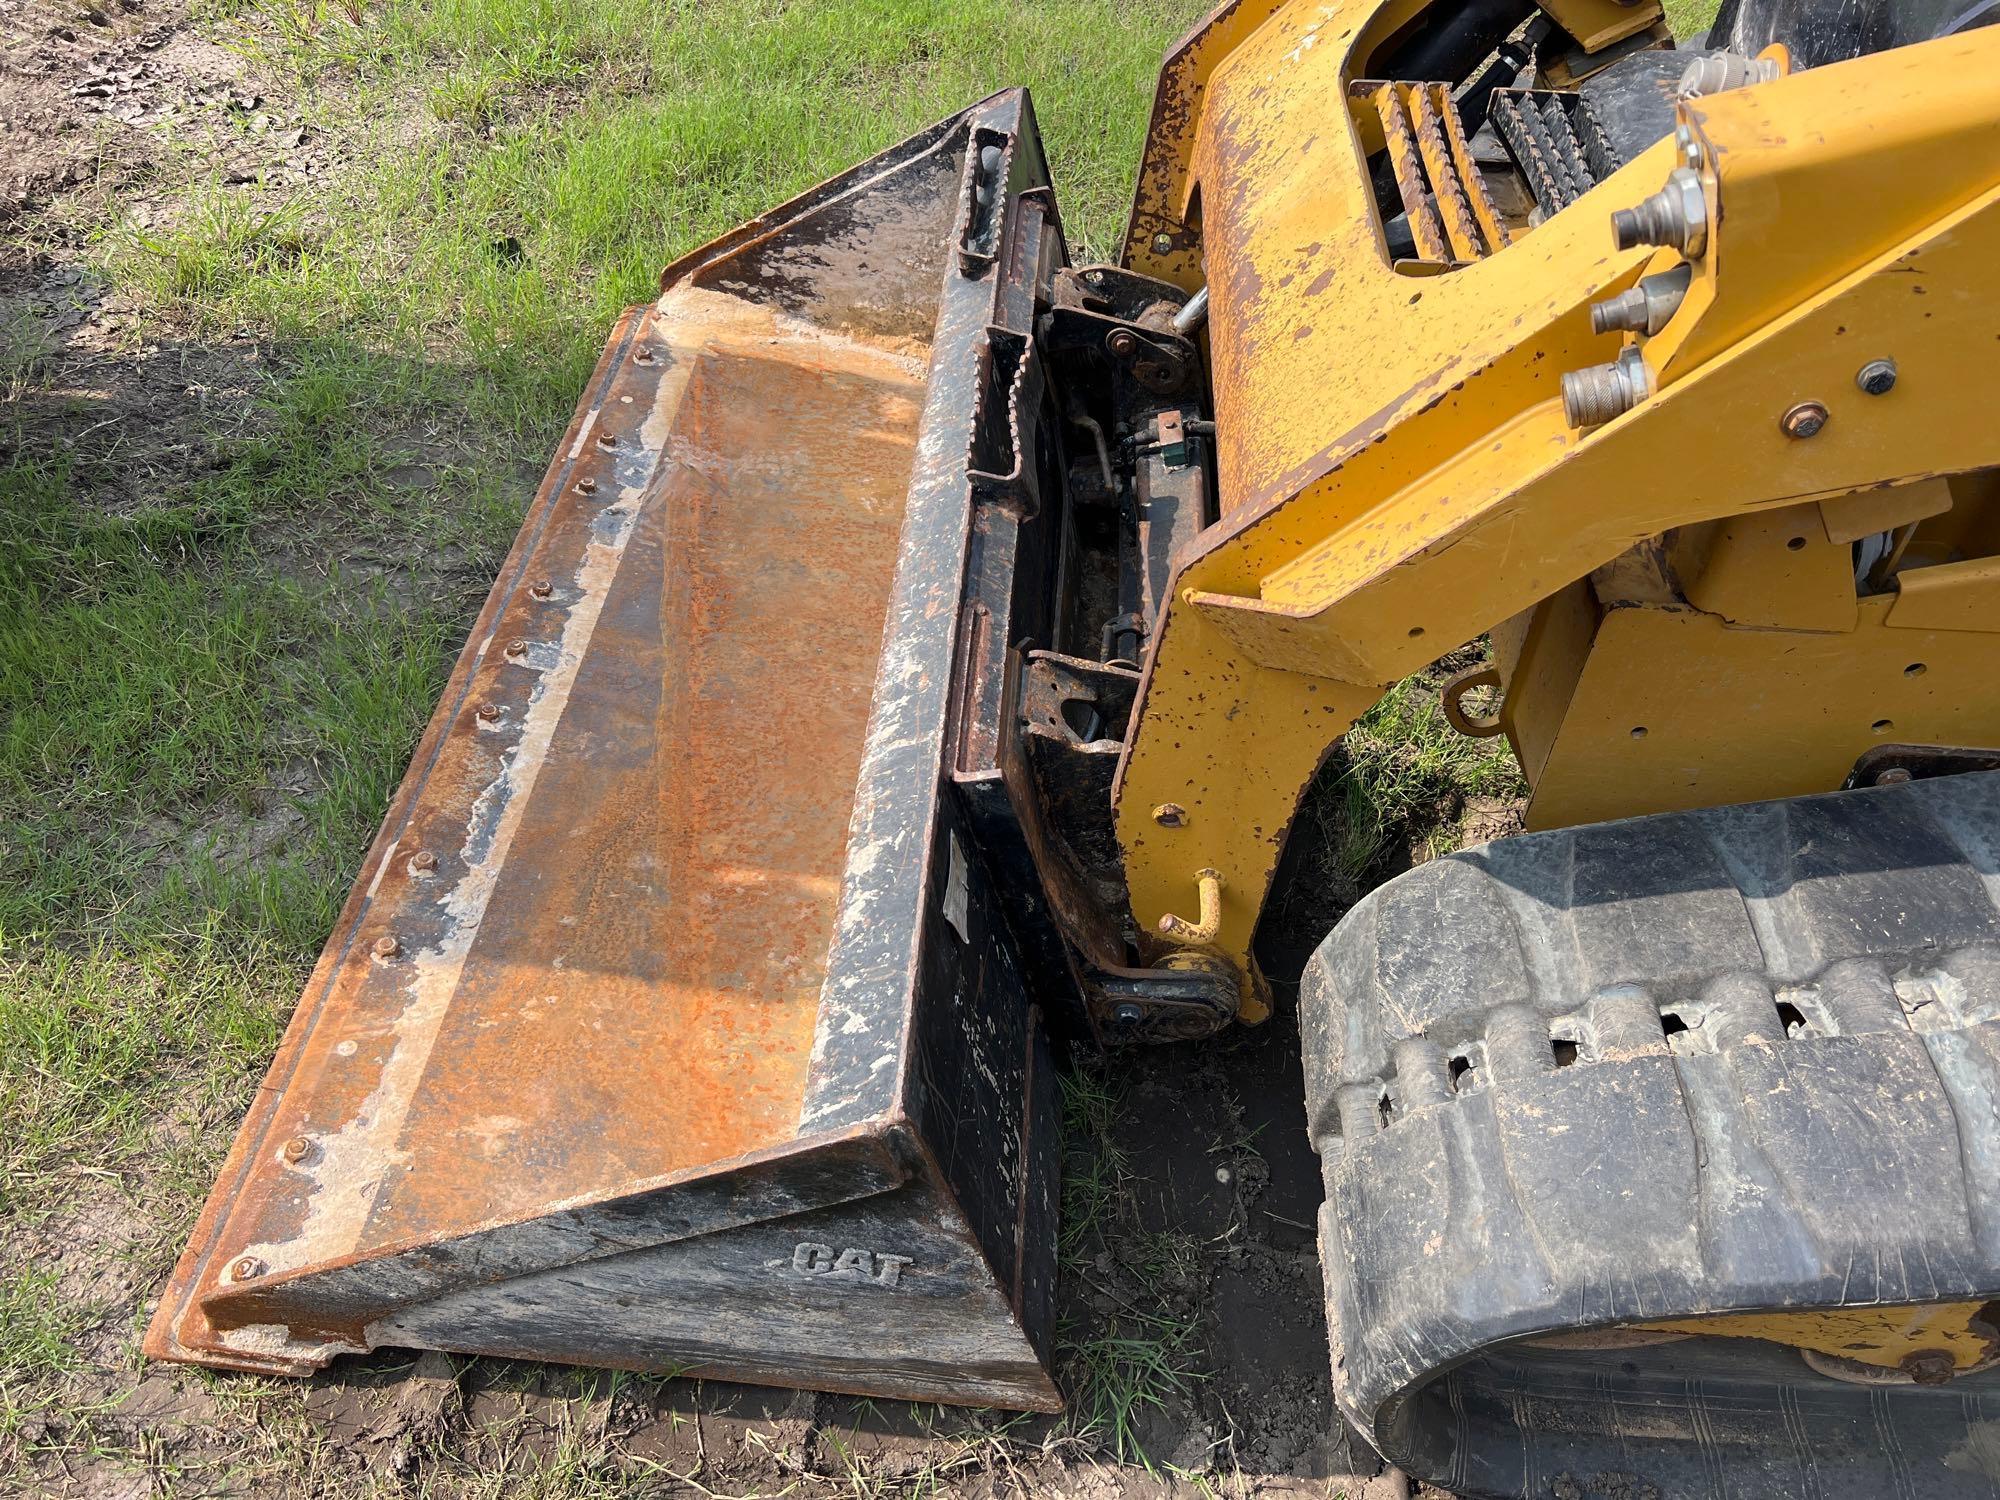 2018 CAT 299D2 RUBBER TRACKED SKID STEER SN:FD203295 powered by Cat diesel engine, equipped with